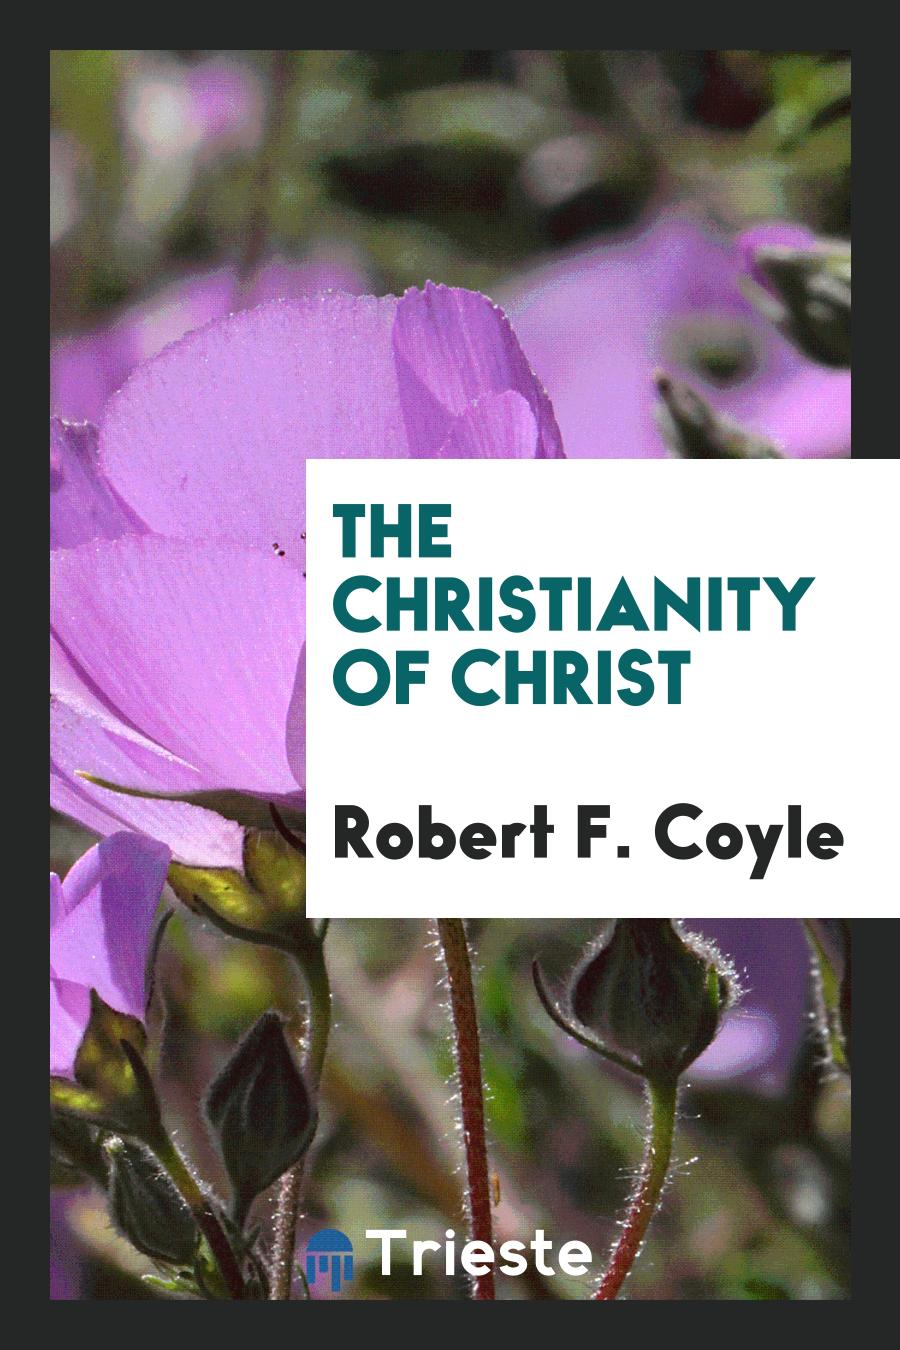 The Christianity of Christ